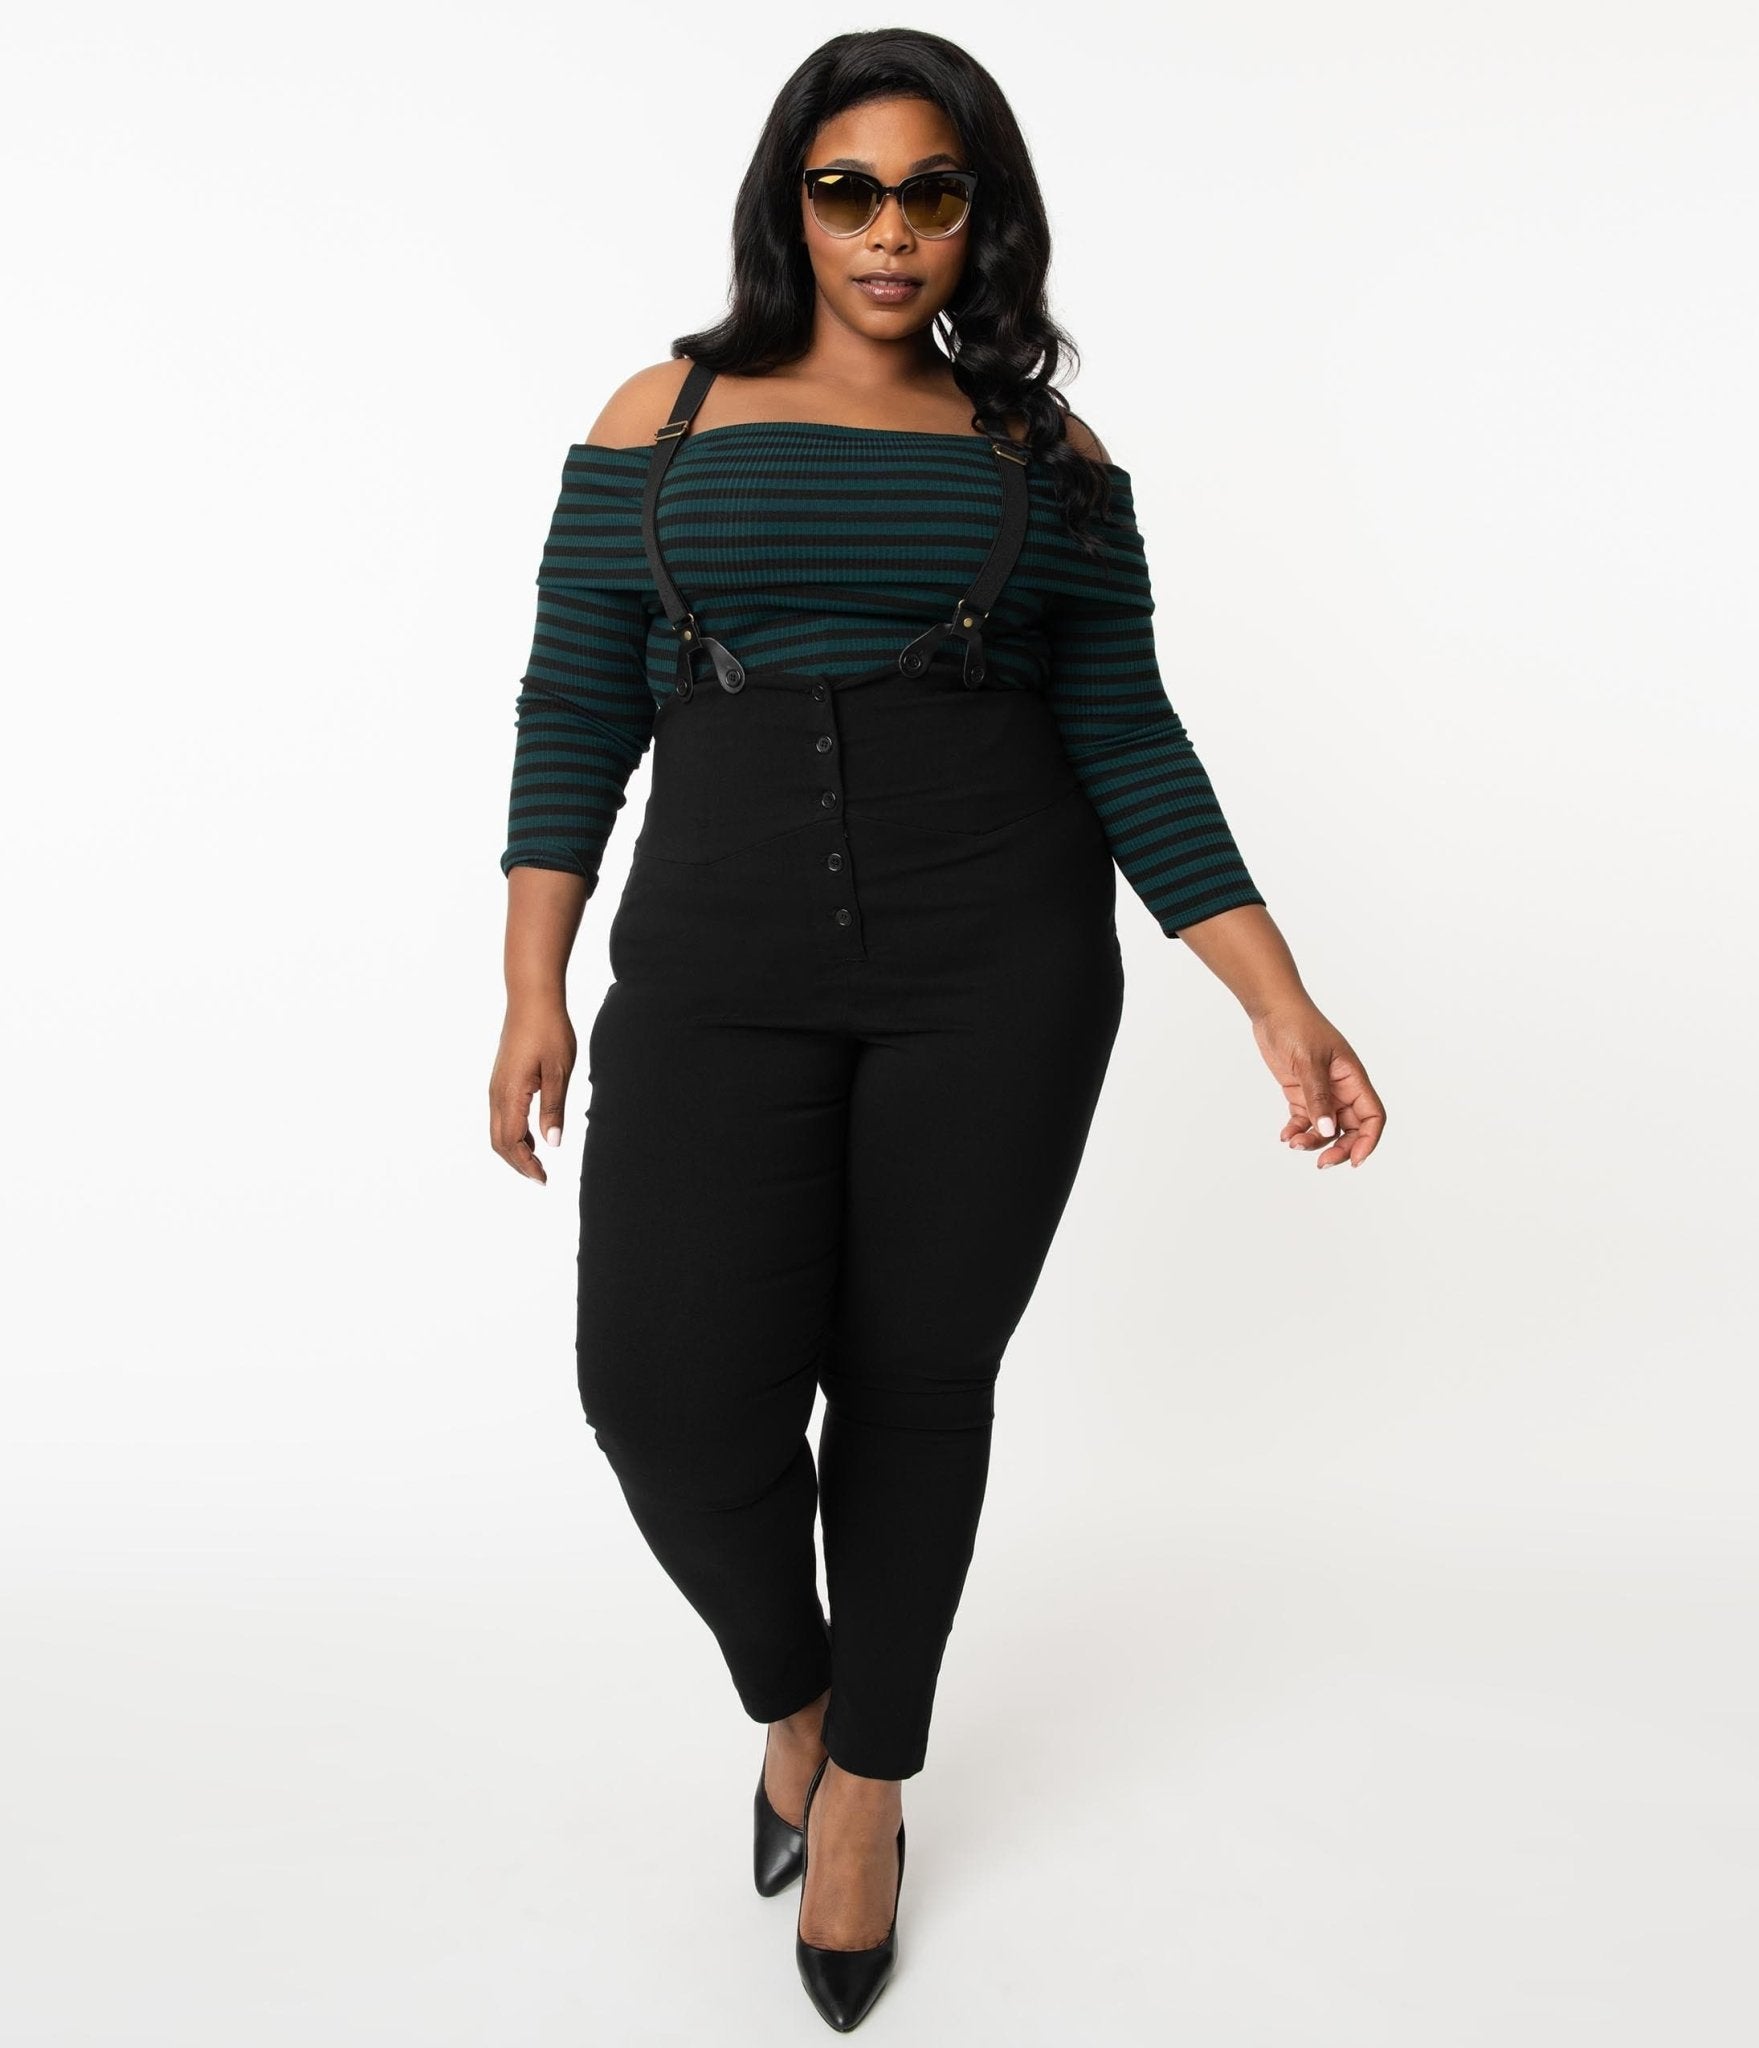 First look: Target's new plus-size clothing line